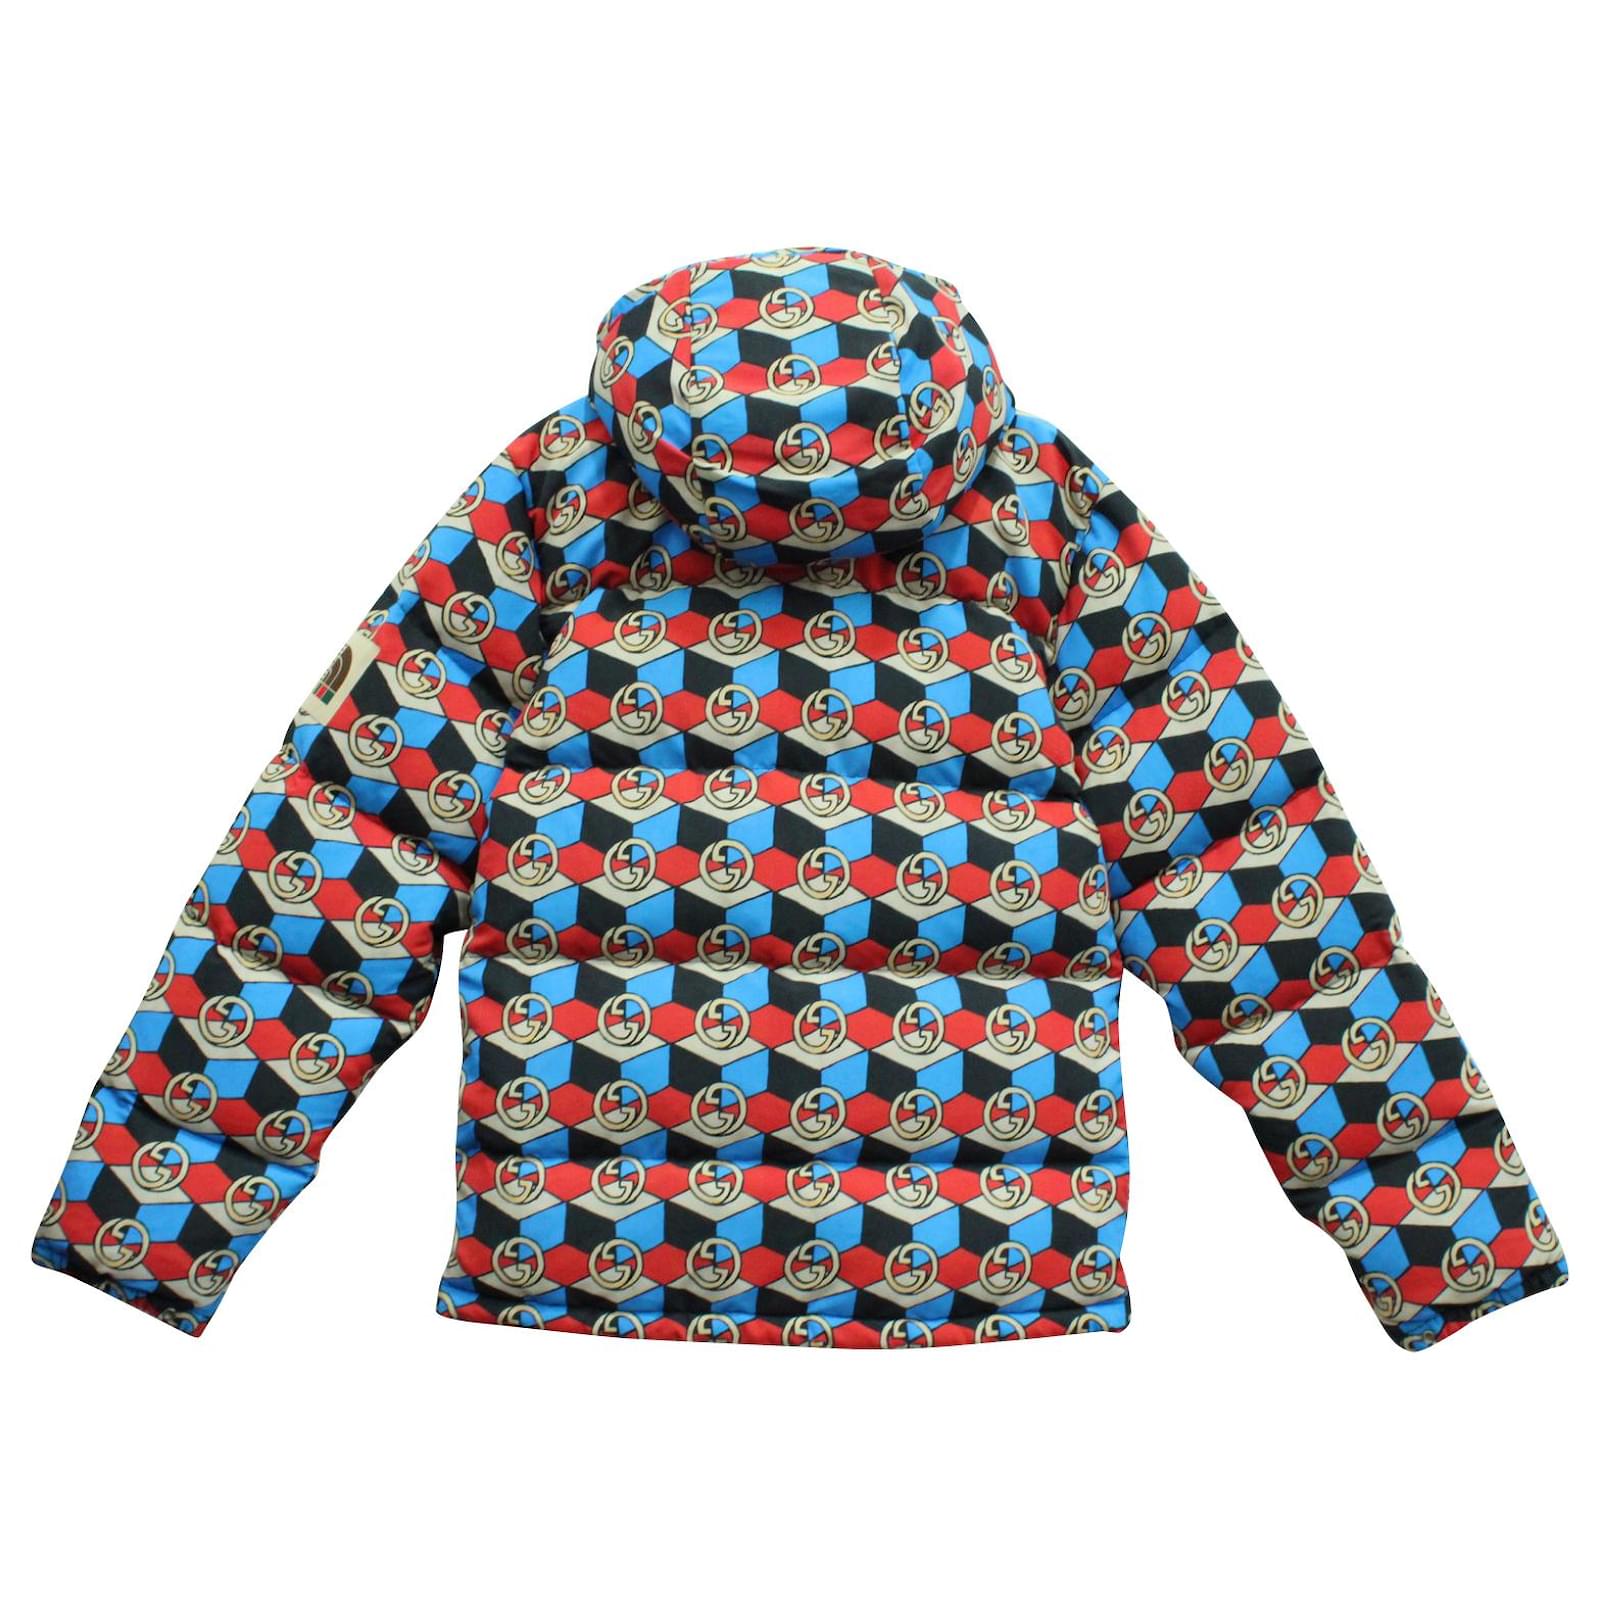 Gucci x North Face Puffer Jacket in Blue Polyamide Multiple colors ...